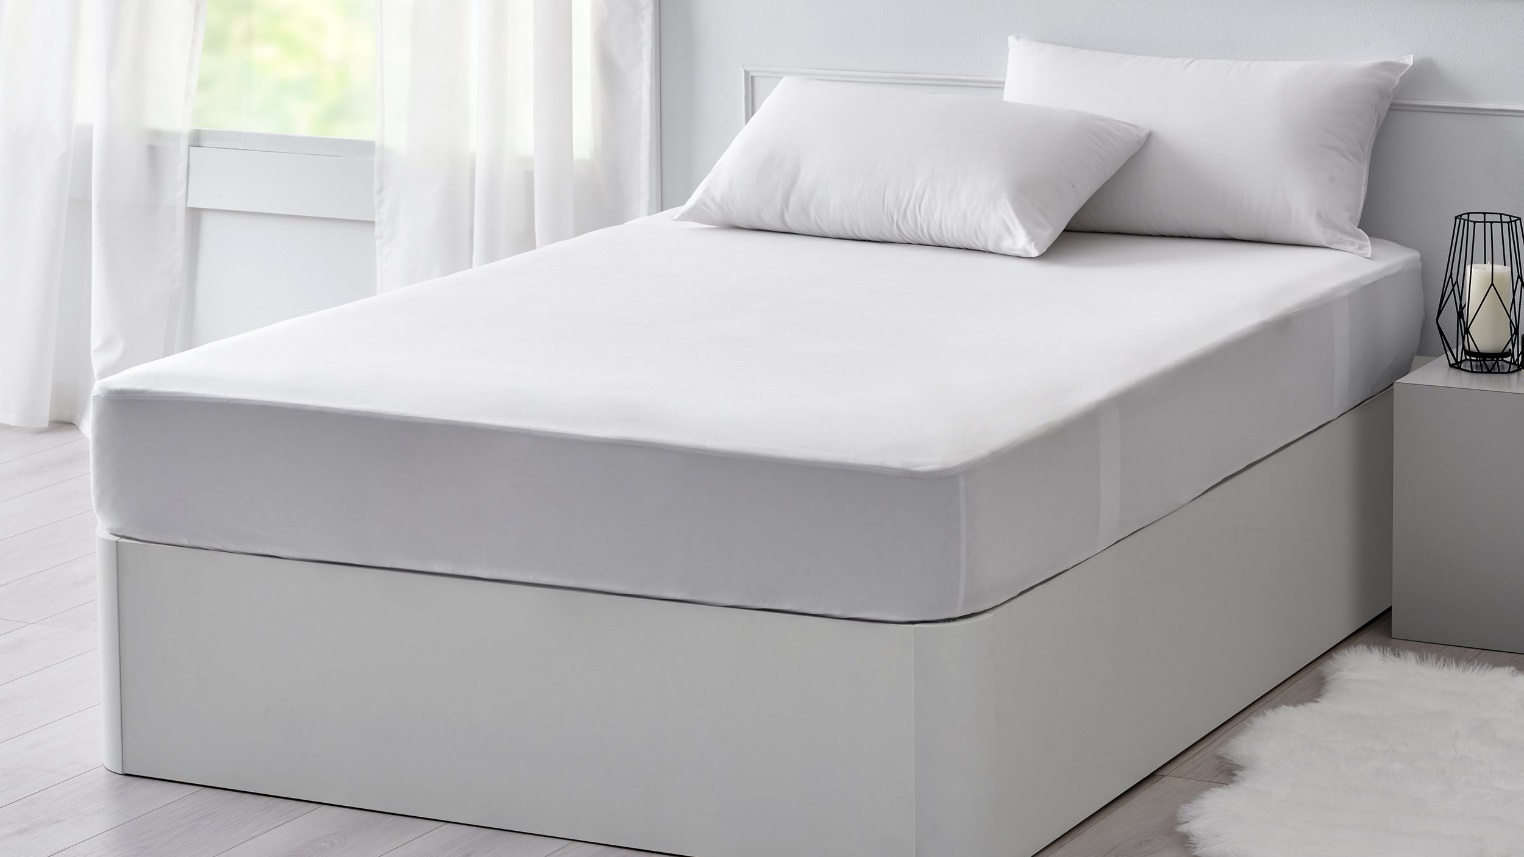 The best mattress protectors for 2020: waterproof, cotton and ...